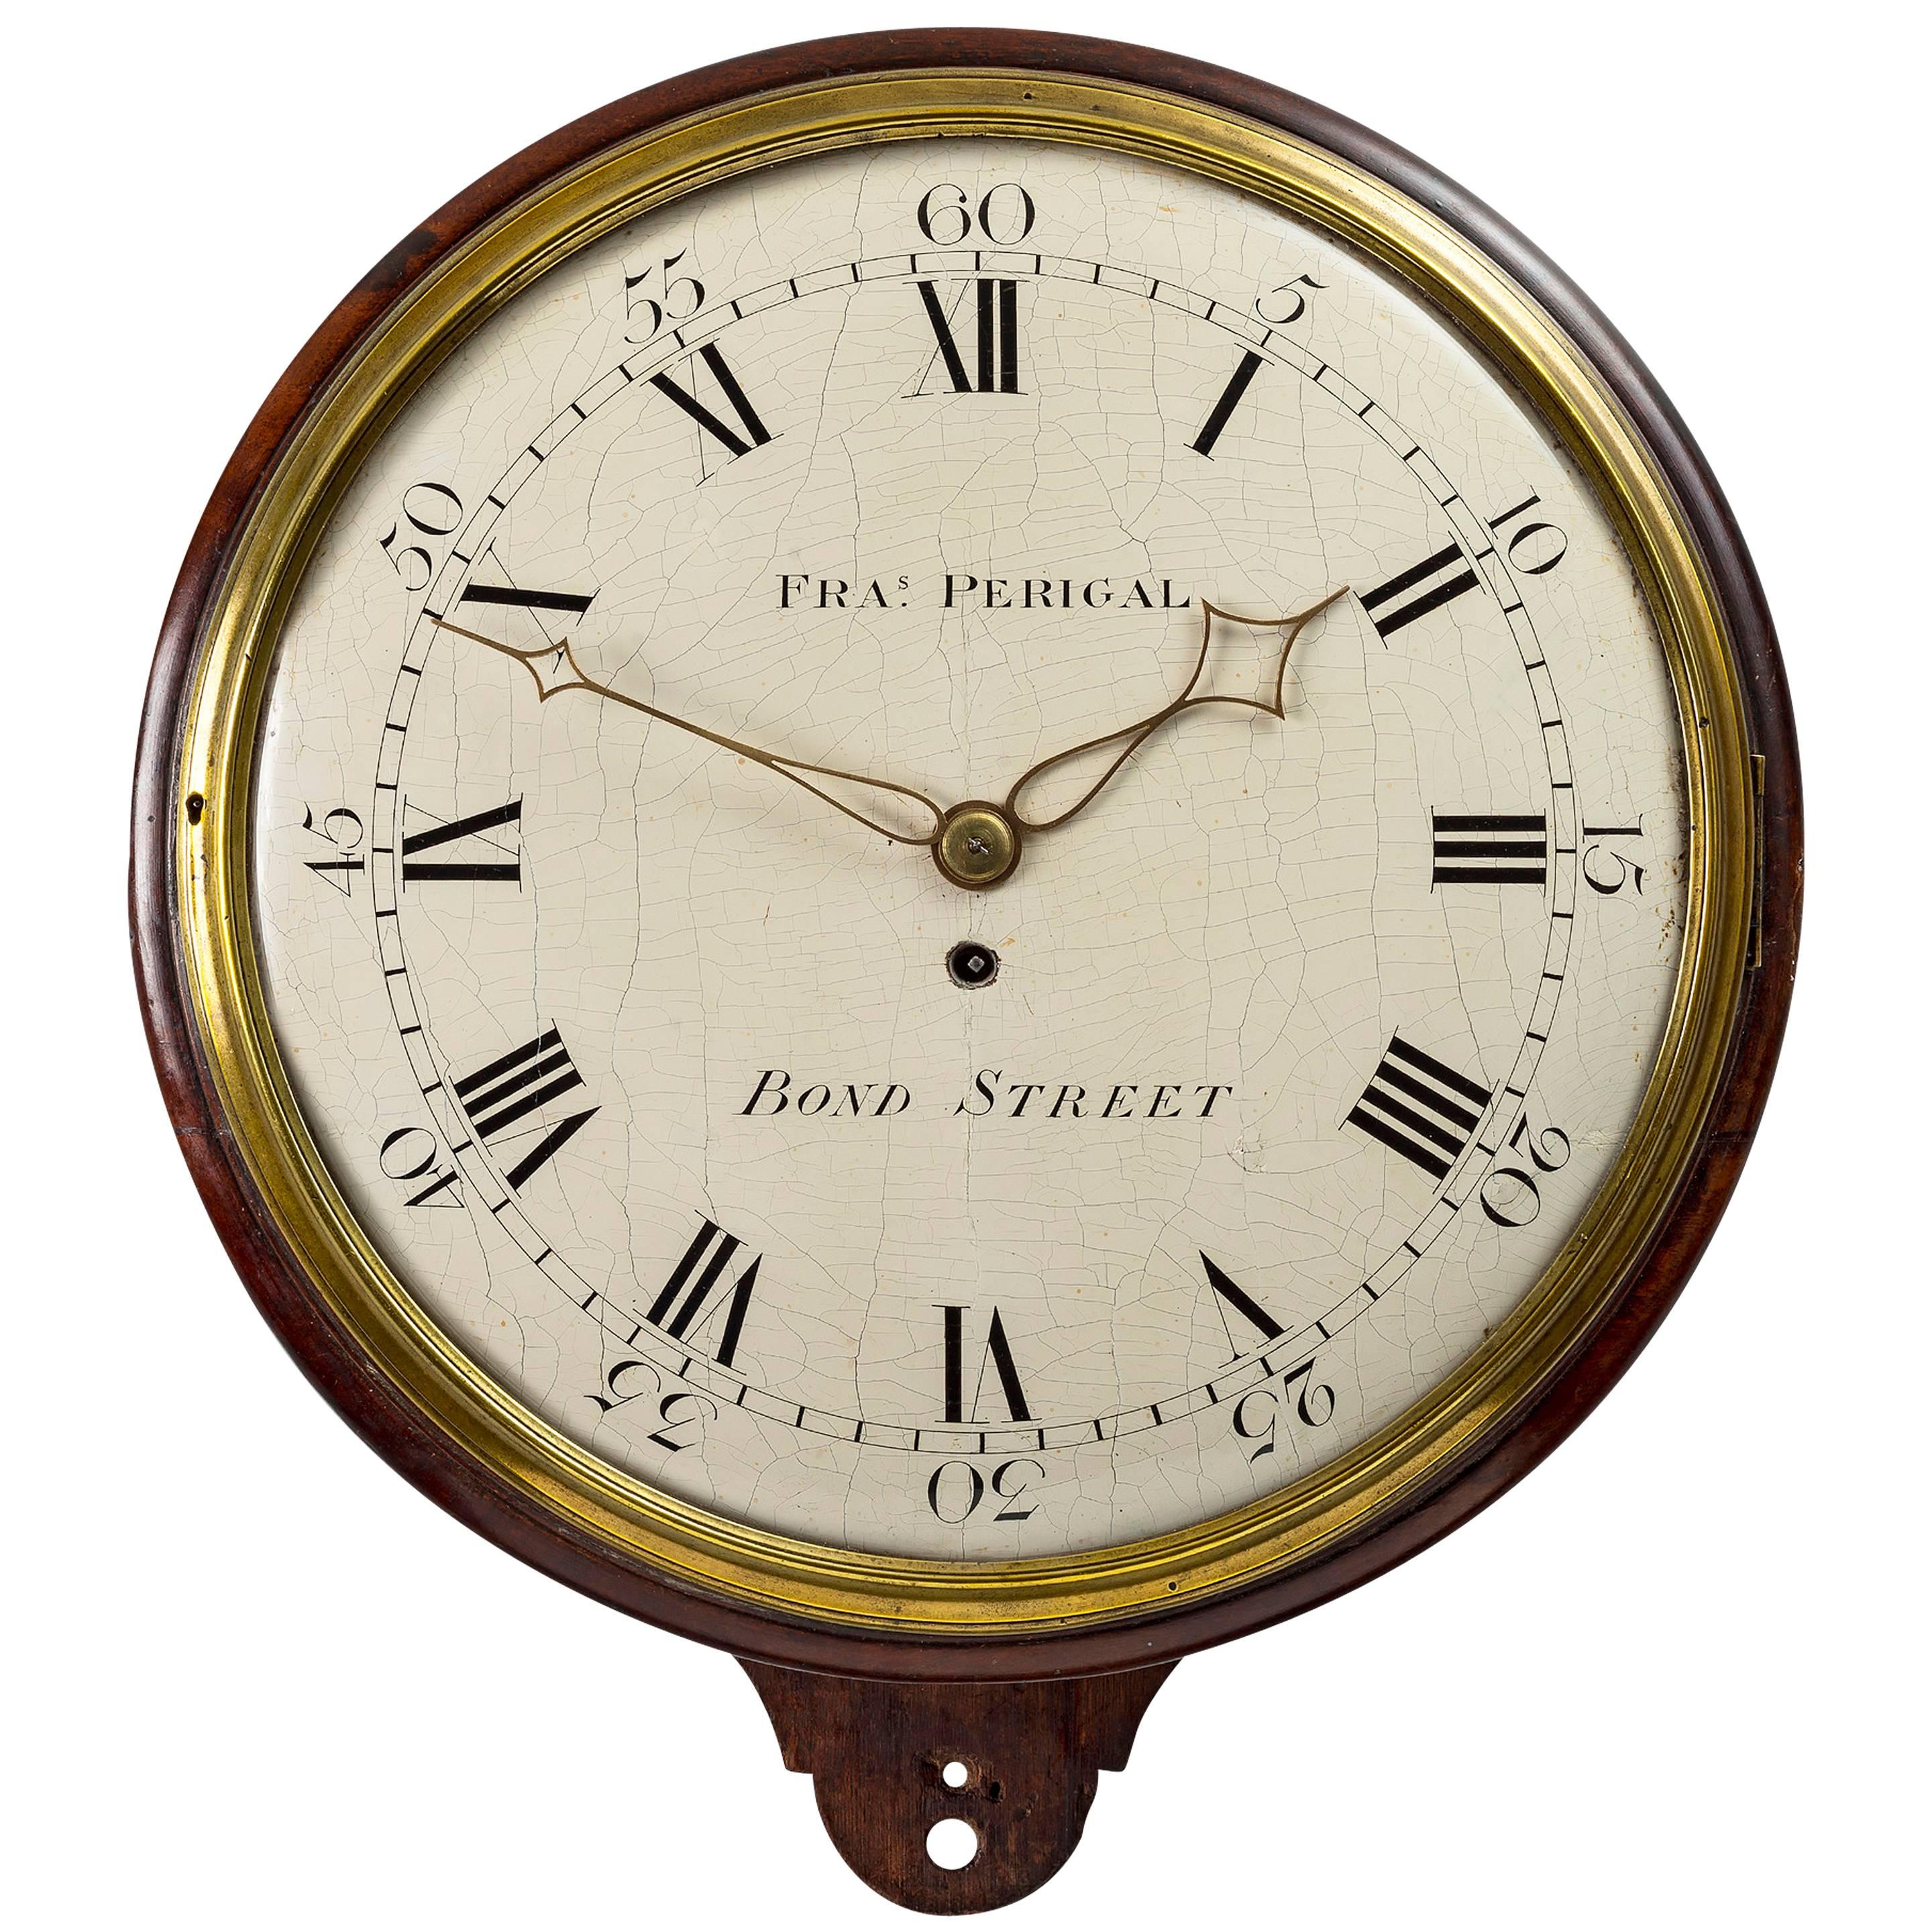 Antique Mahogany Dial Timepiece by Francis Perigal, Bond Street, London